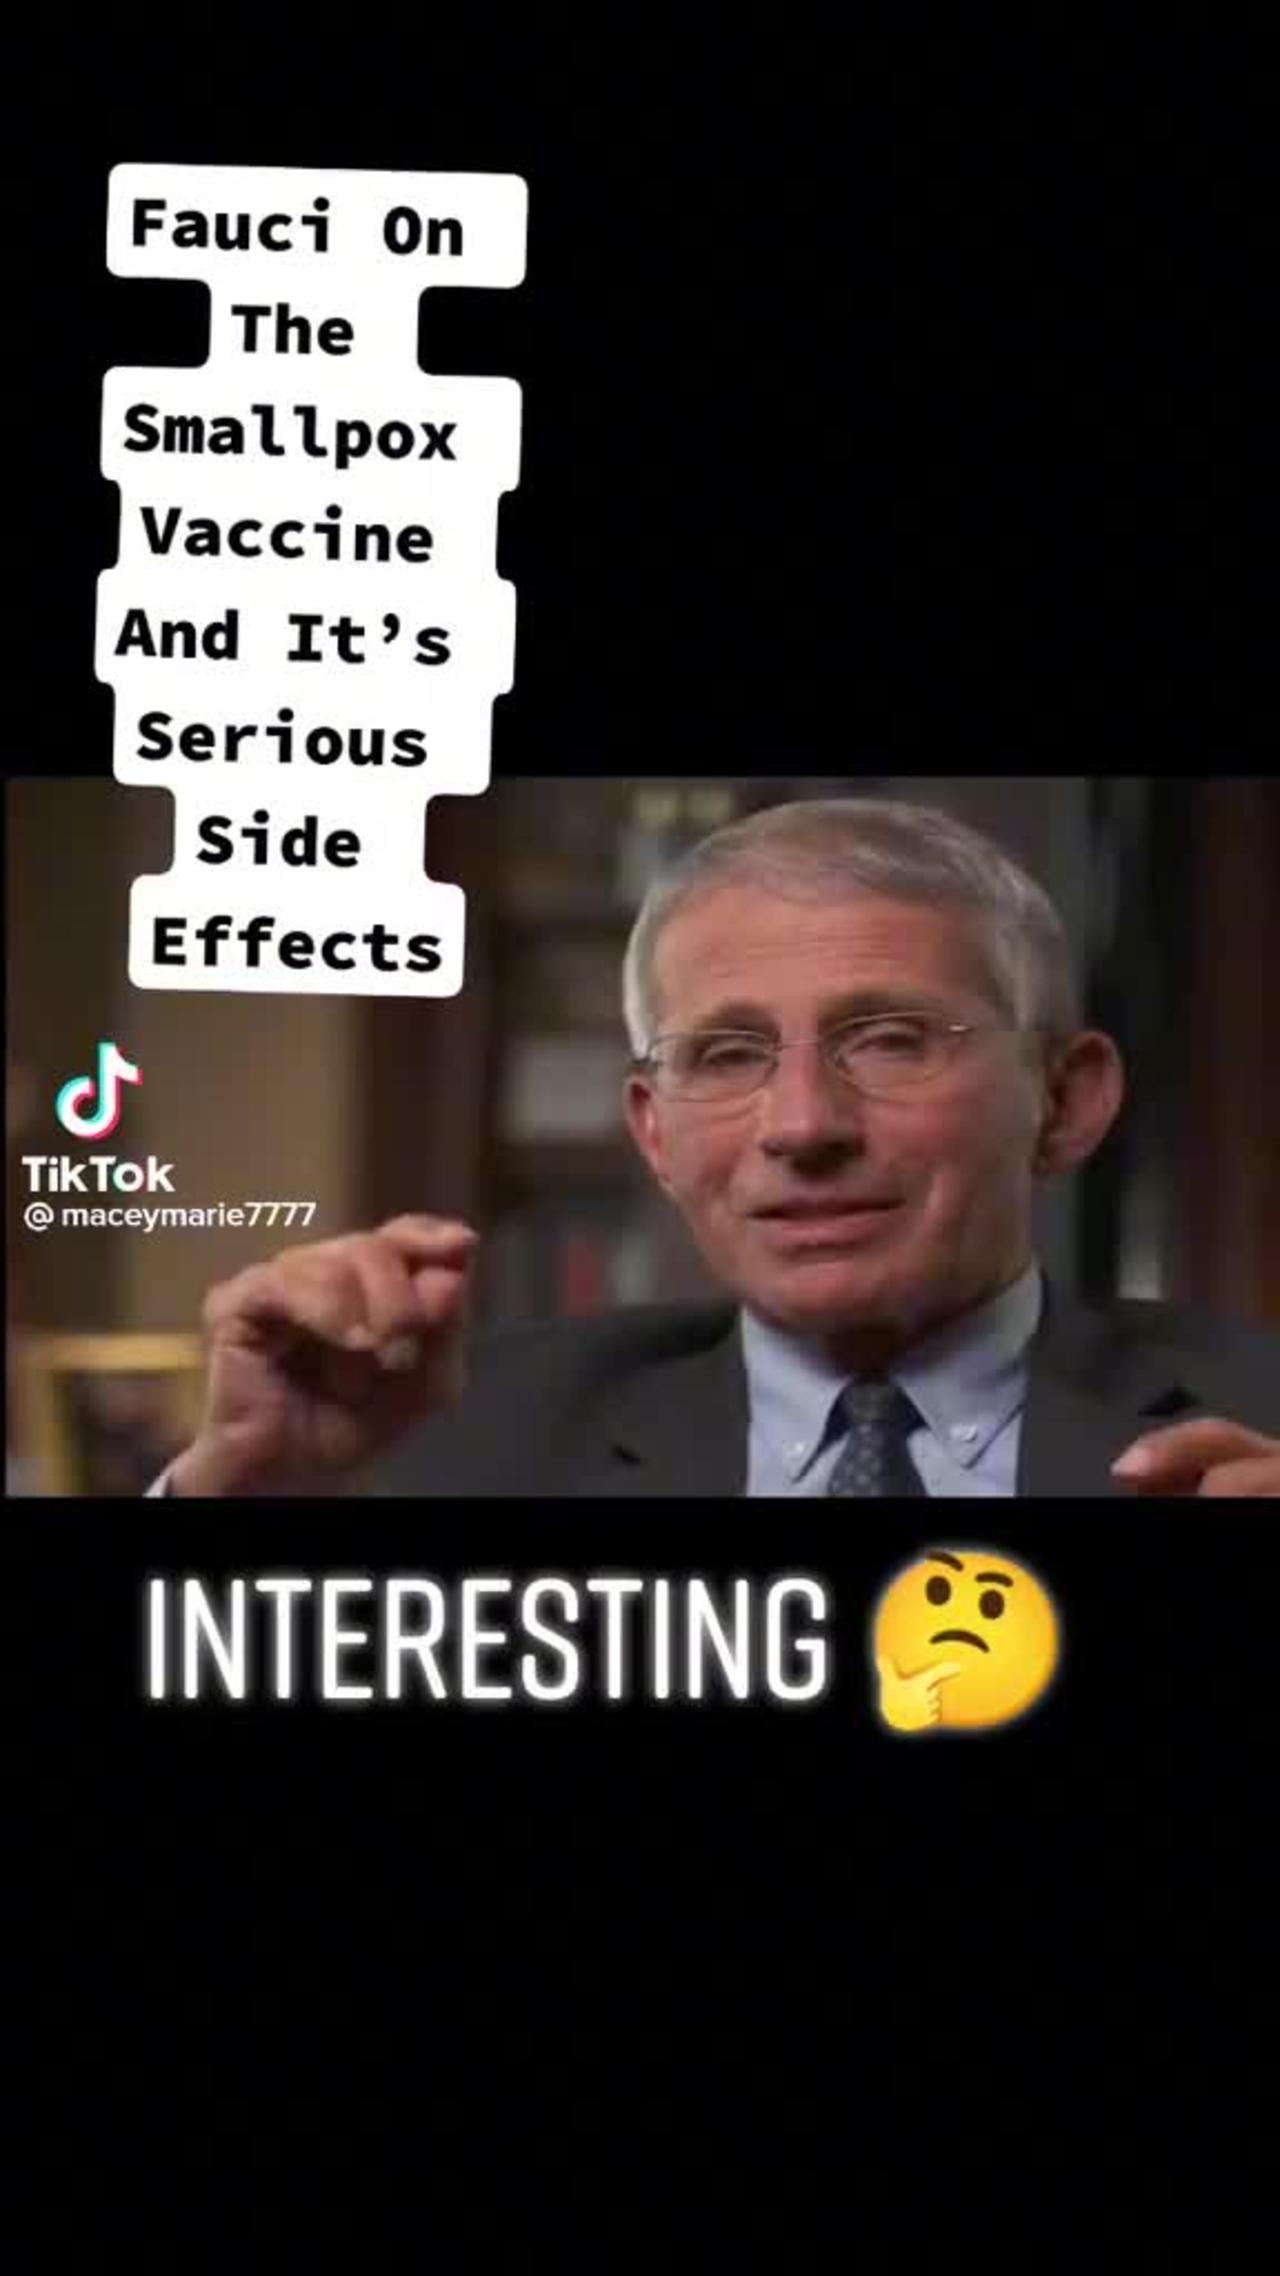 DR FAUCI SAYS VACCINES ARE DANGEROUS